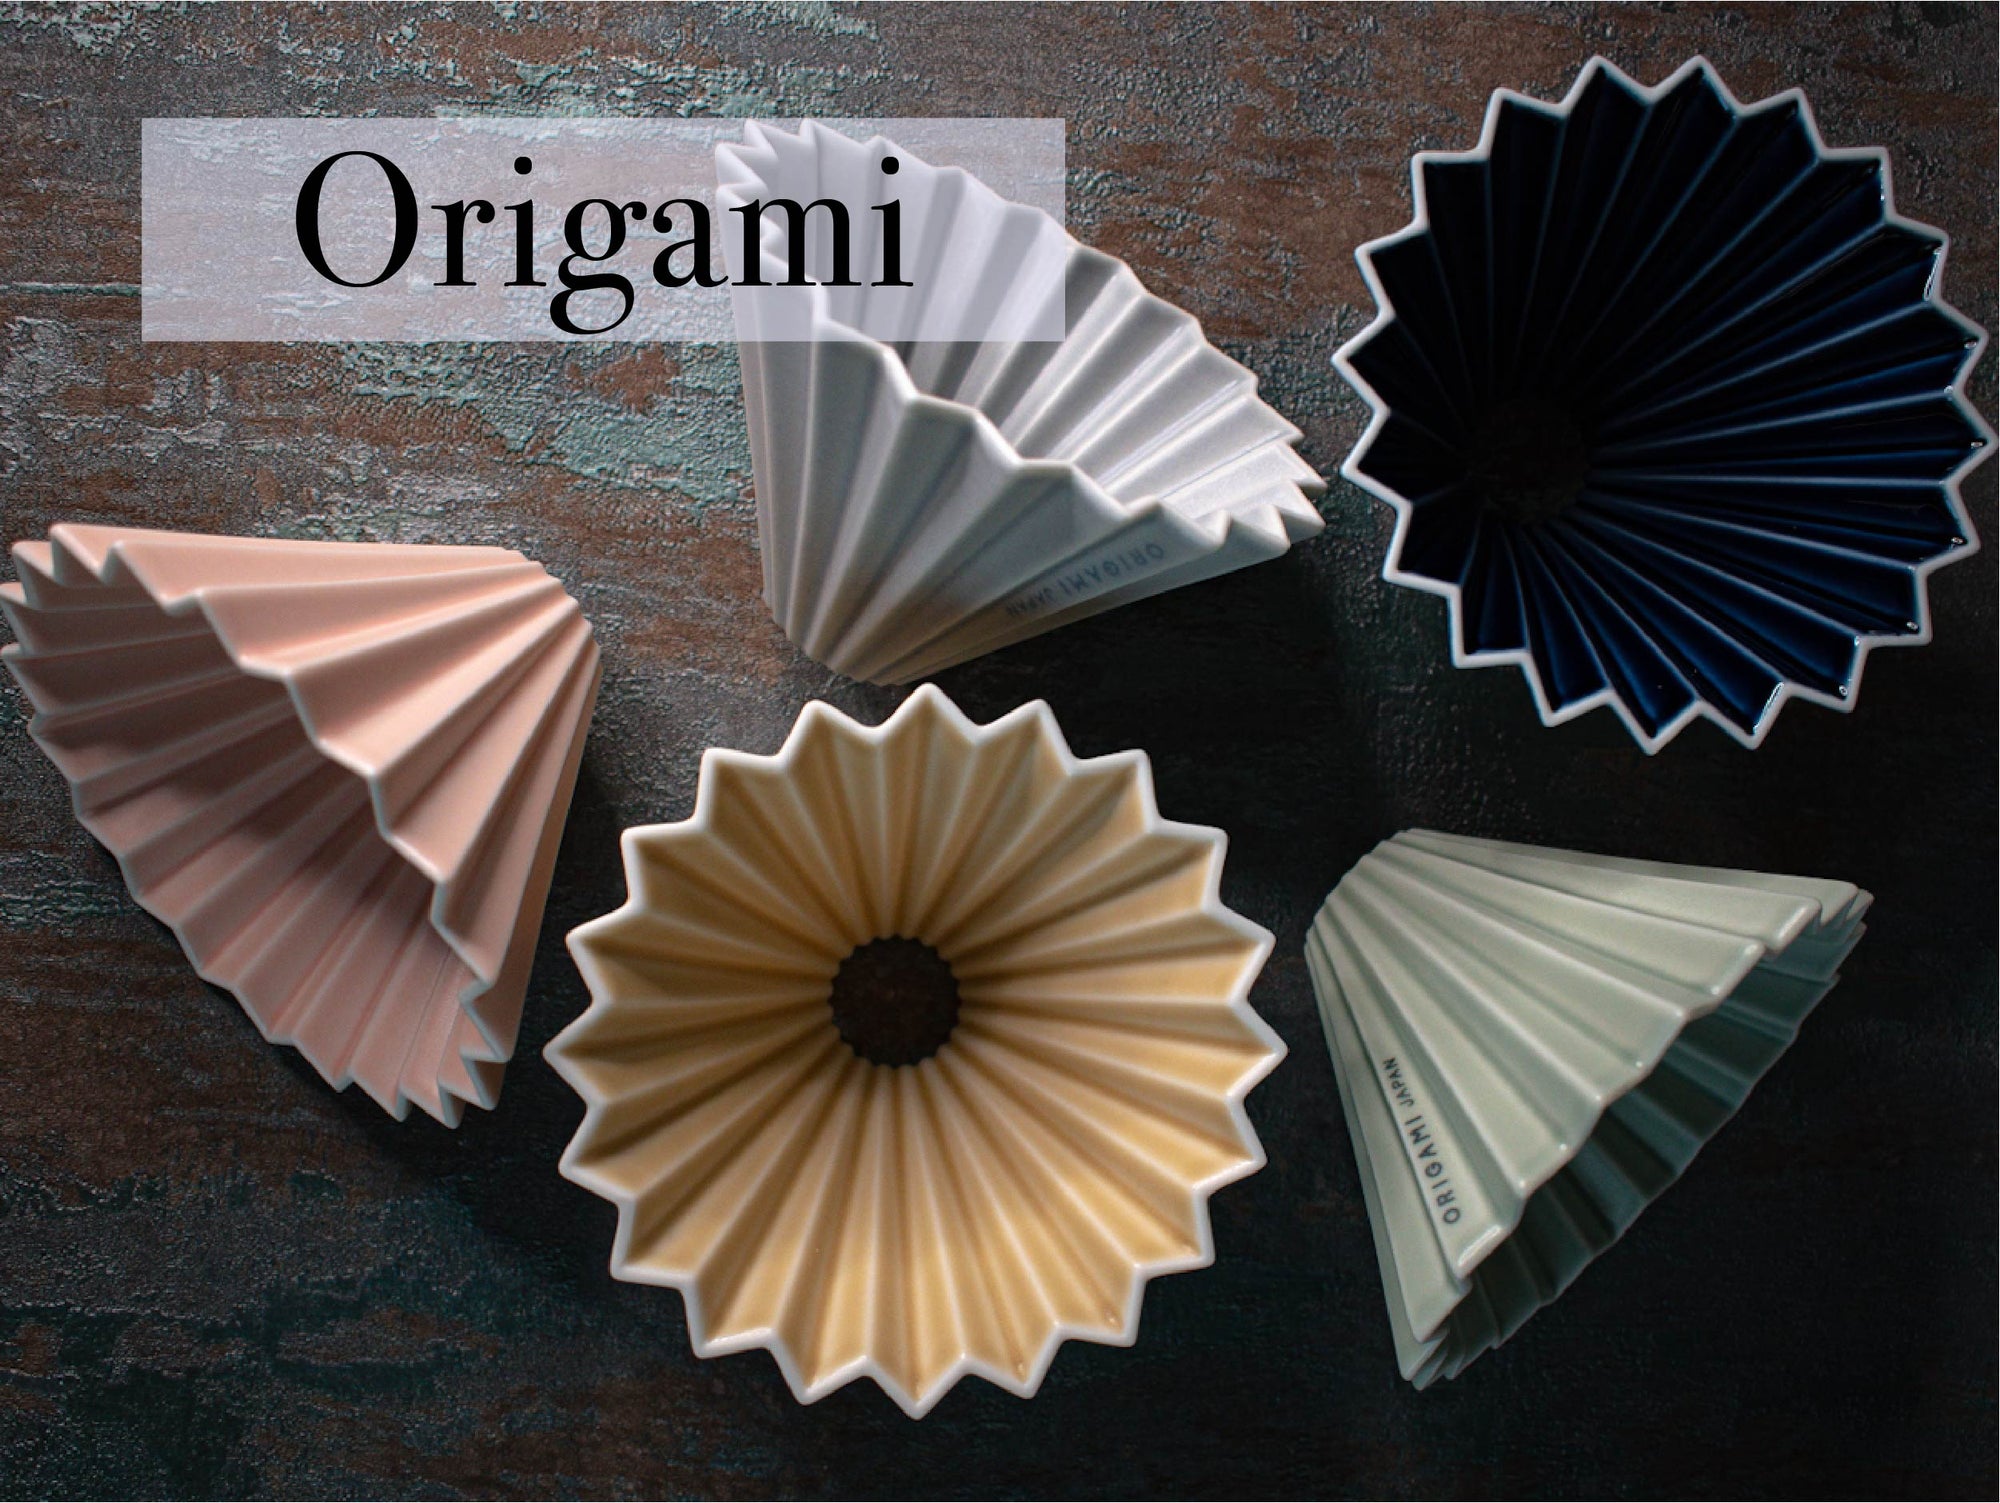 Origami Dripper for Specialty Coffee Brewing - Curious Buds